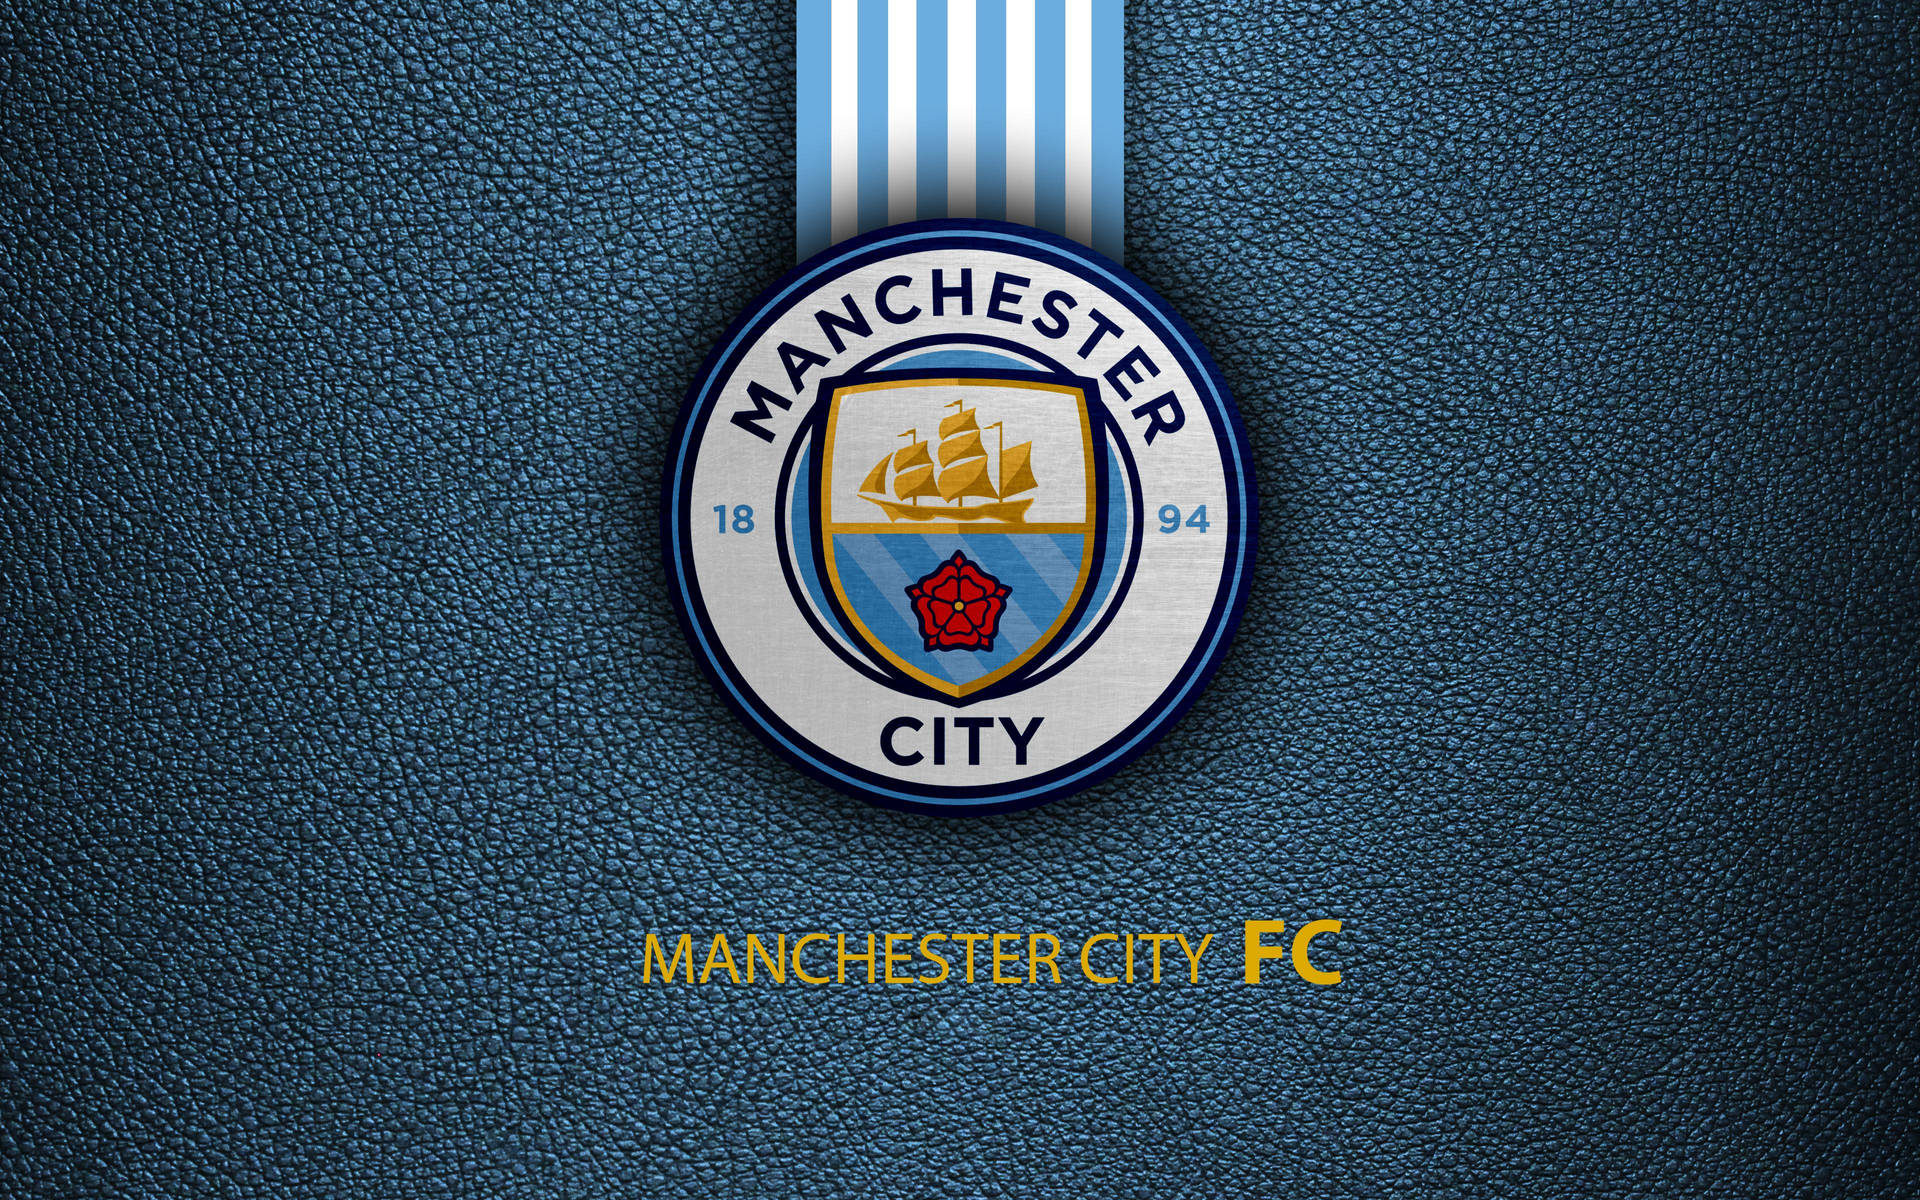 Manchester City 4k Football Club Badge Background